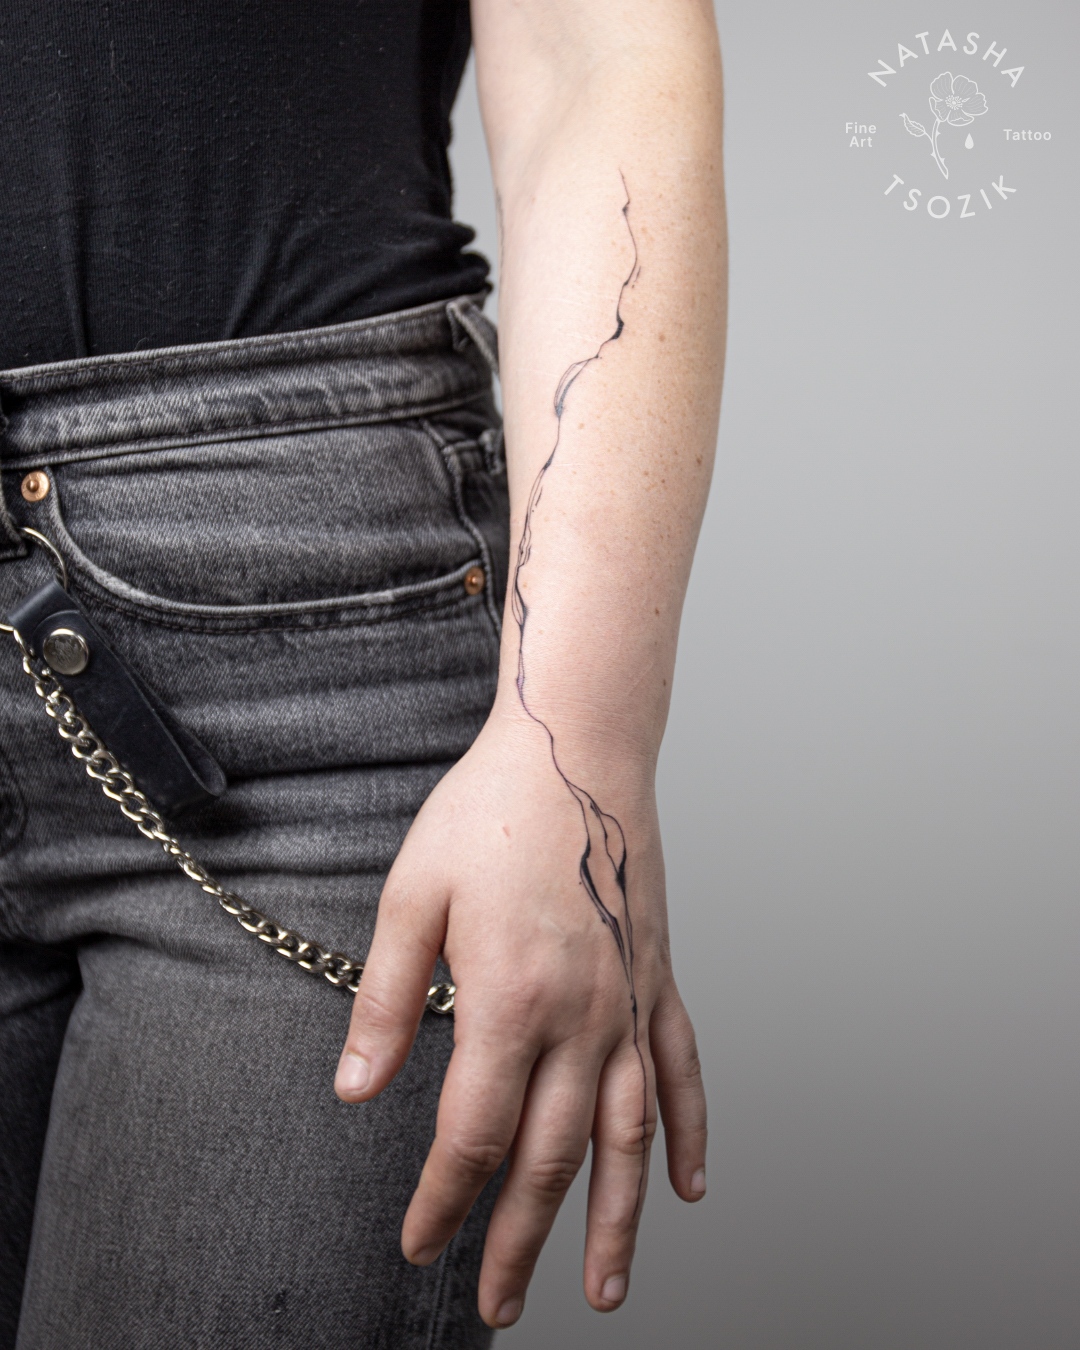 What Tattoo Should You Get? Inspo and How to Choose